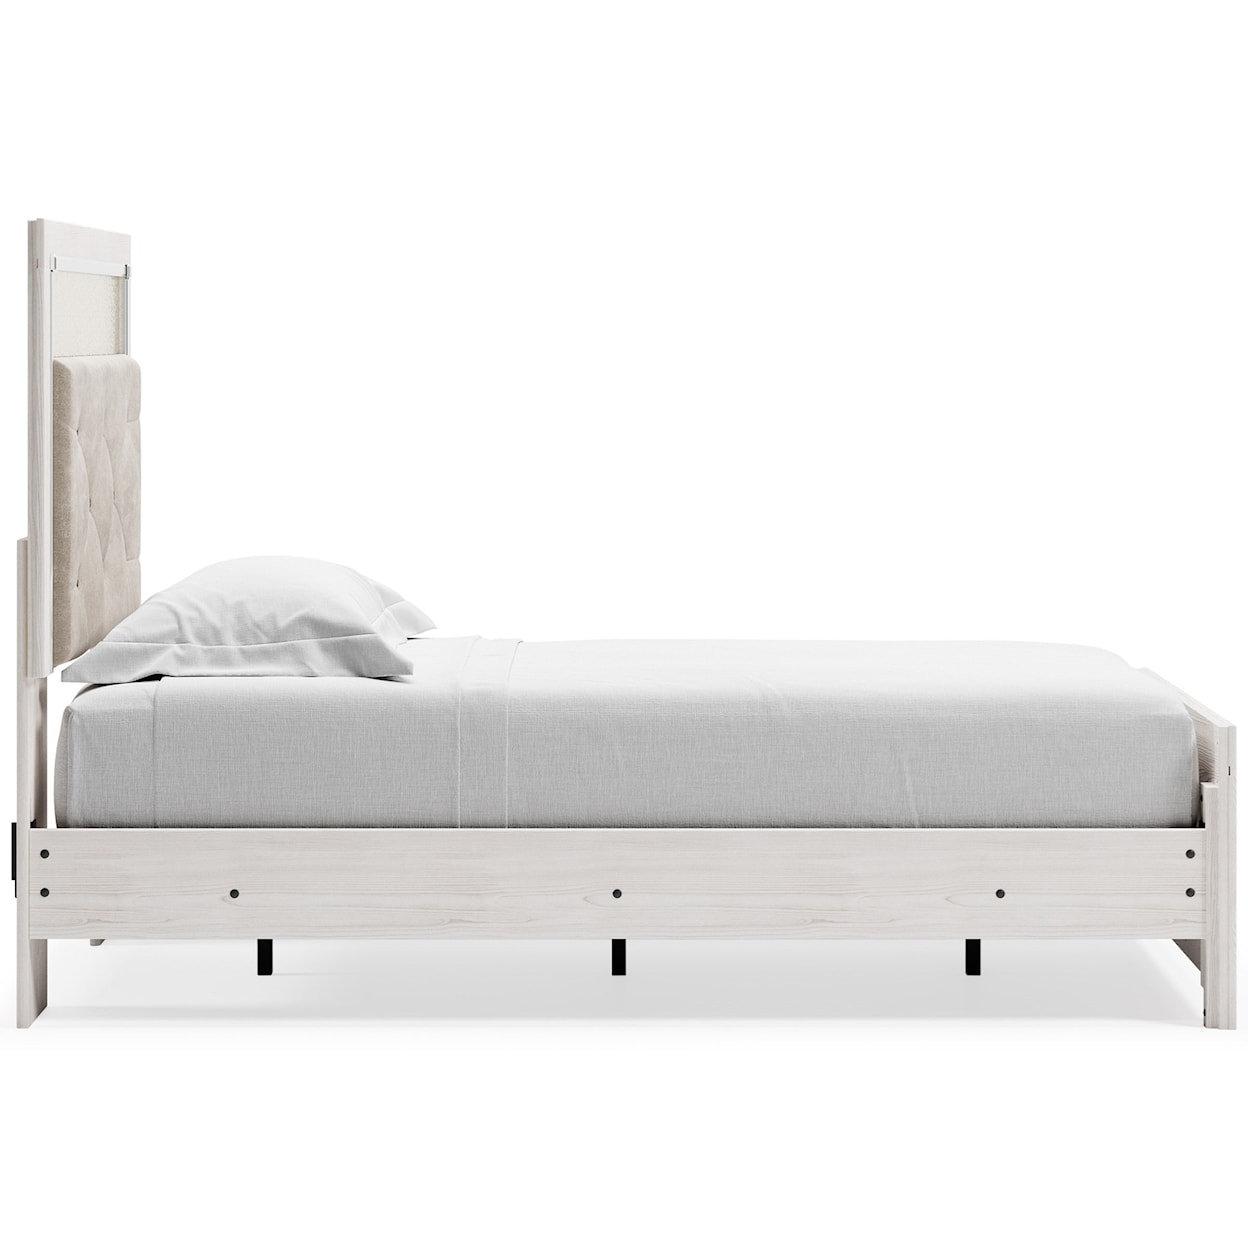 Signature Design by Ashley Altyra Twin Upholstered Panel Bed